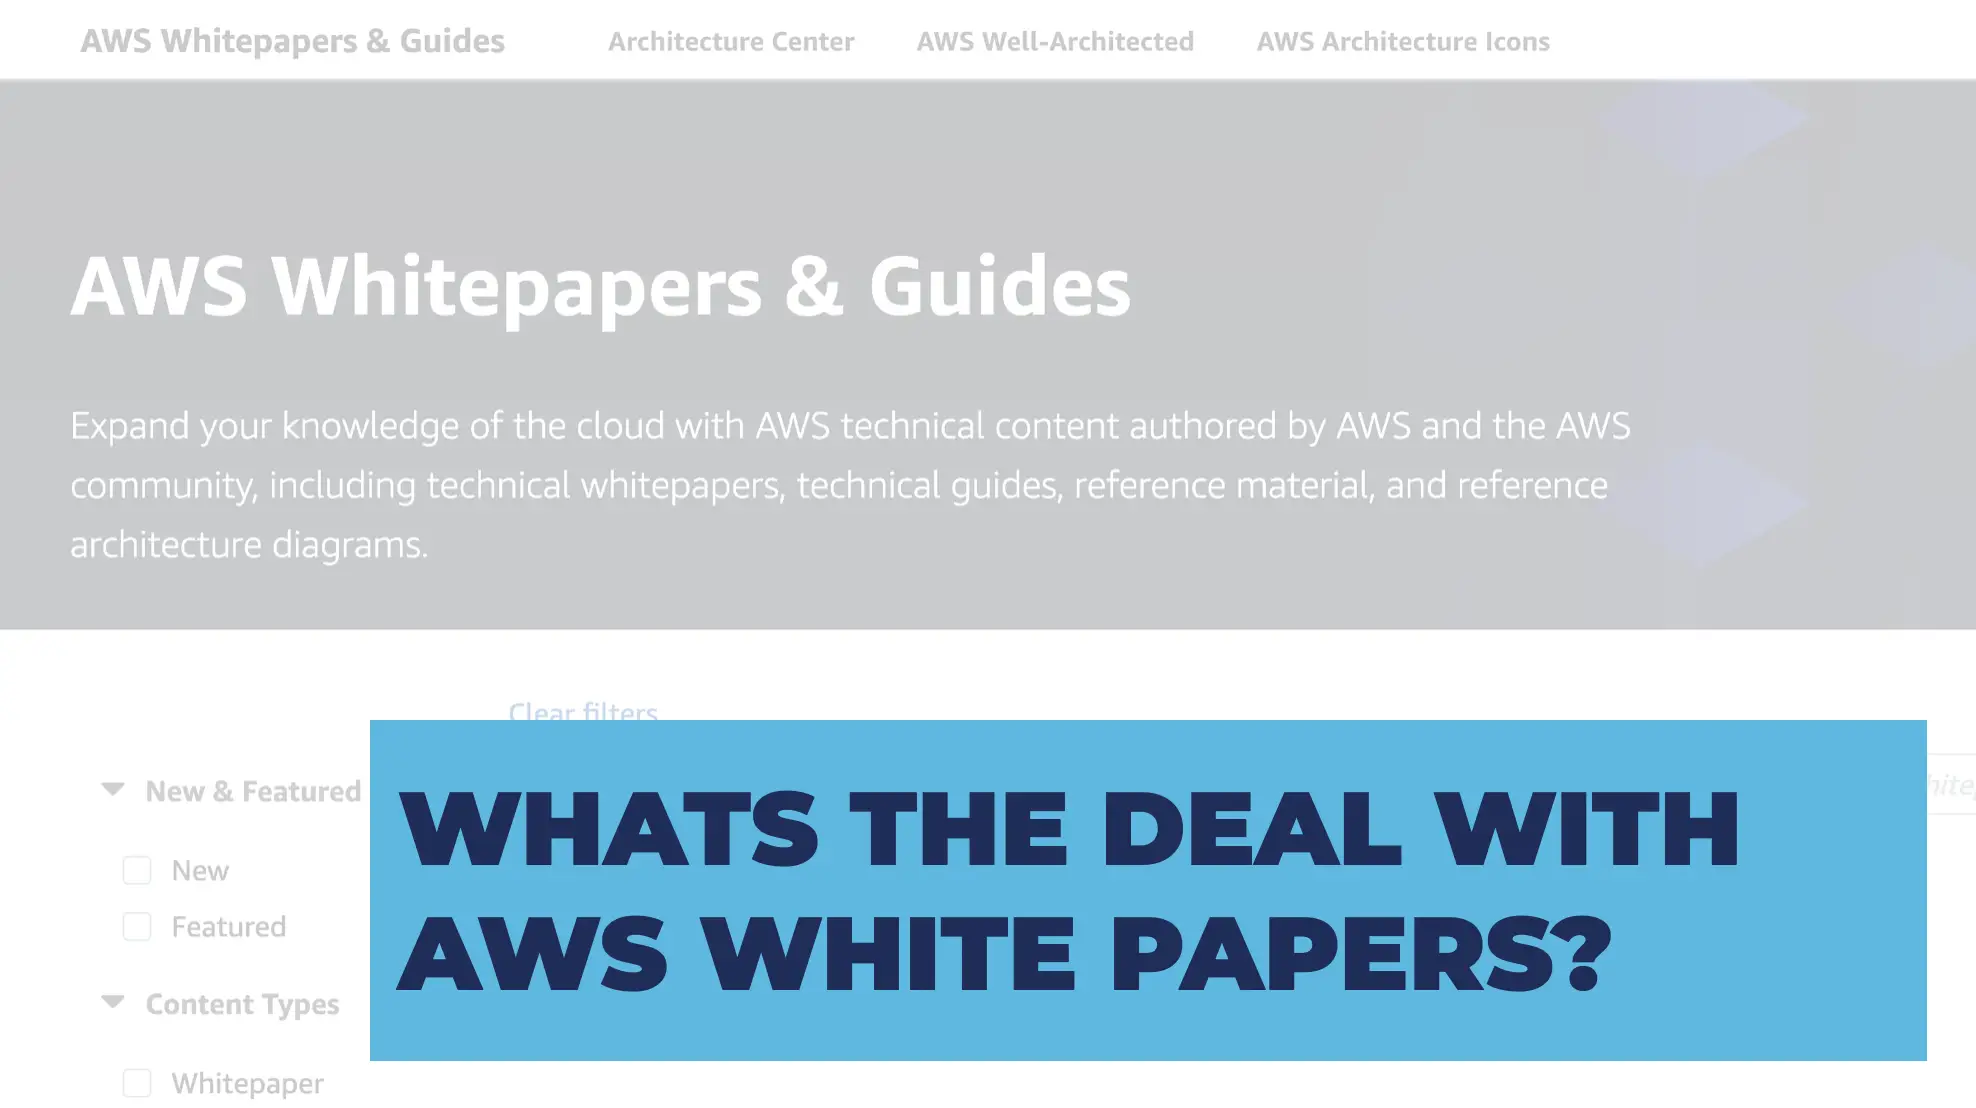 What's the deal with whitepapers?